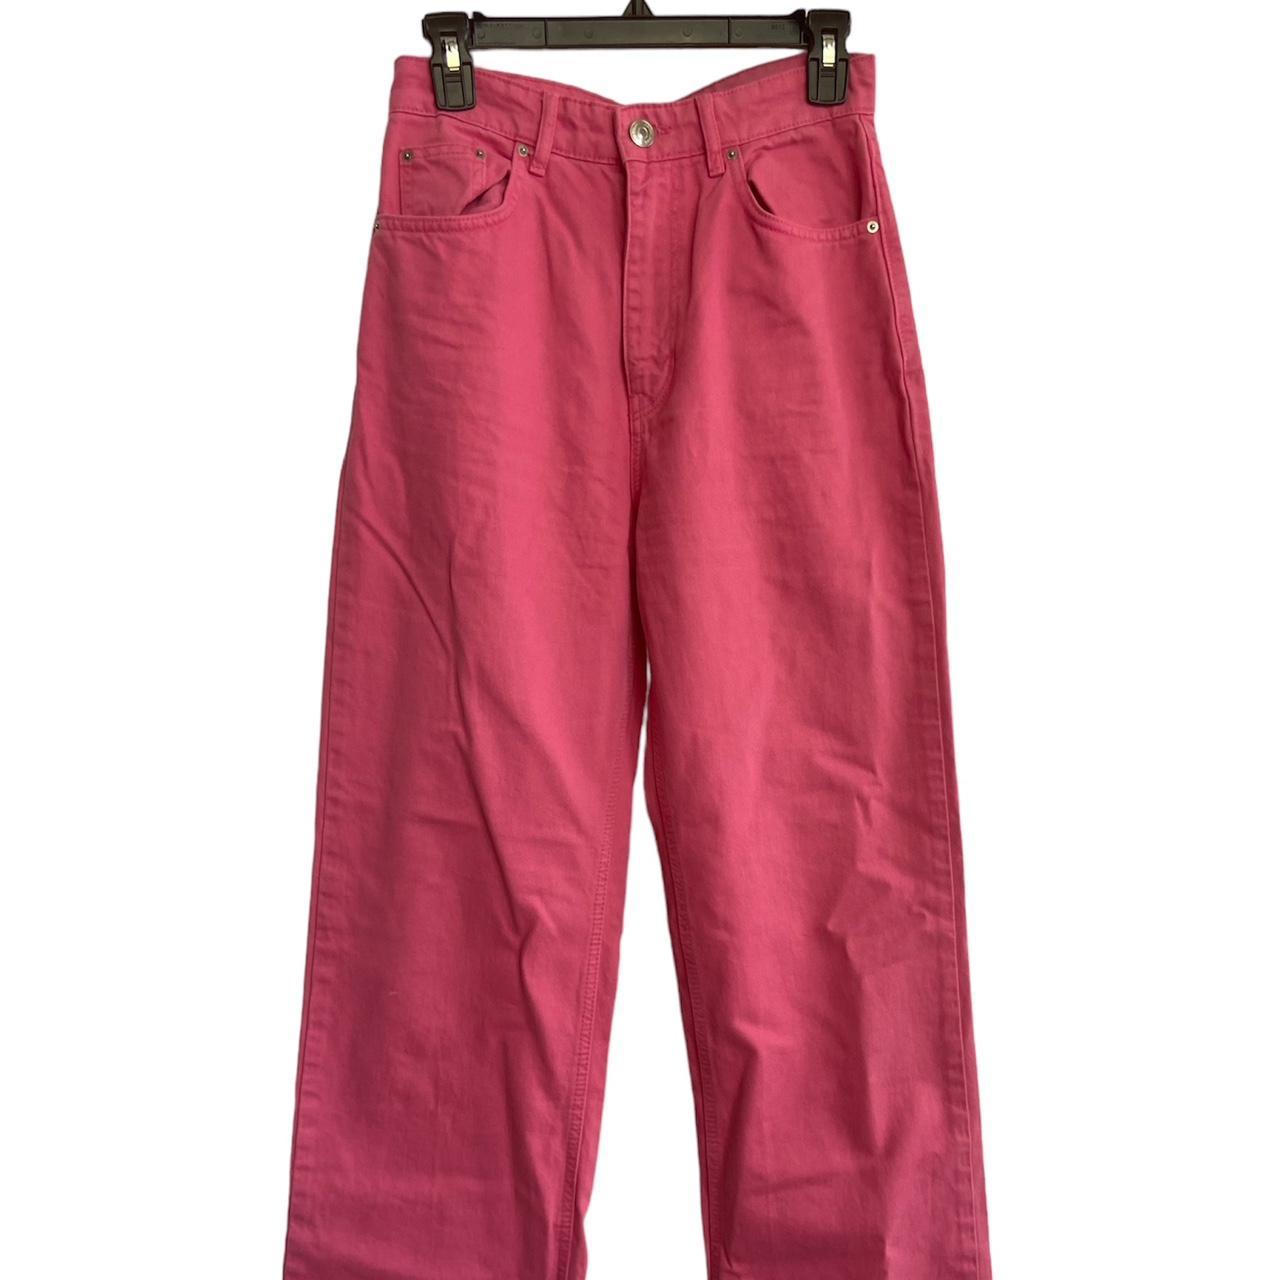 Pants (Pink) from Gina Tricot